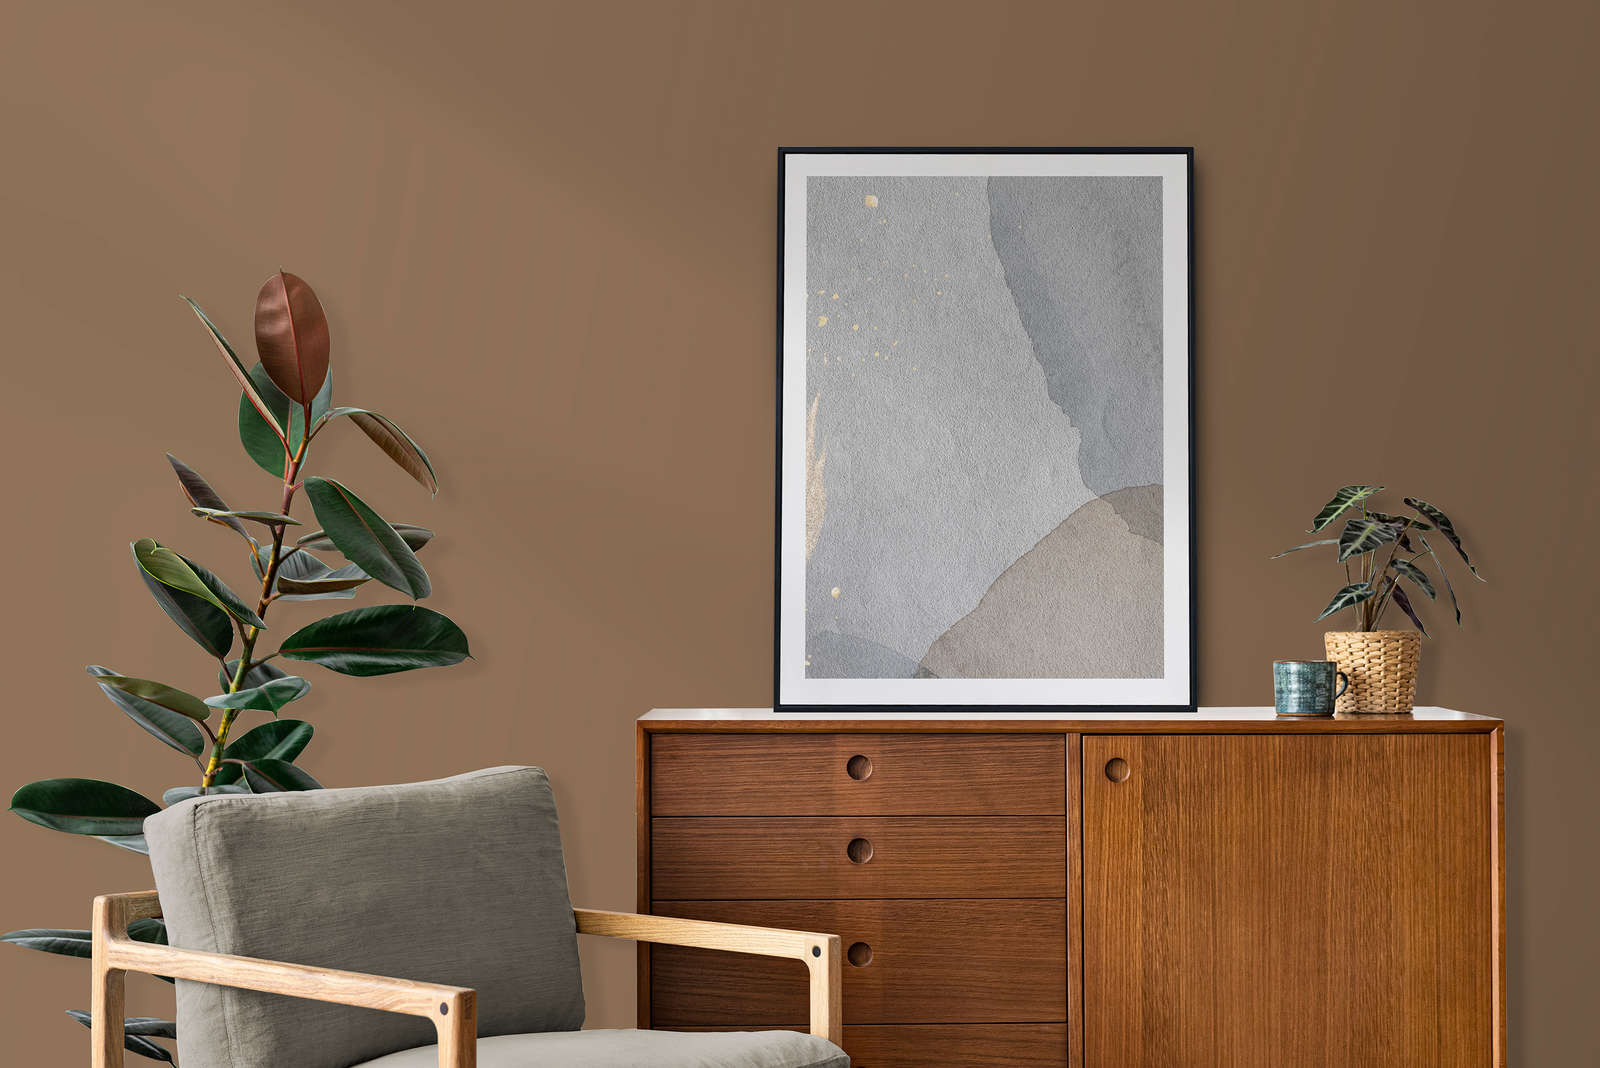             Premium Wall Paint Soothing Light Brown »Modern Mud« NW719 – 2.5 litre
        